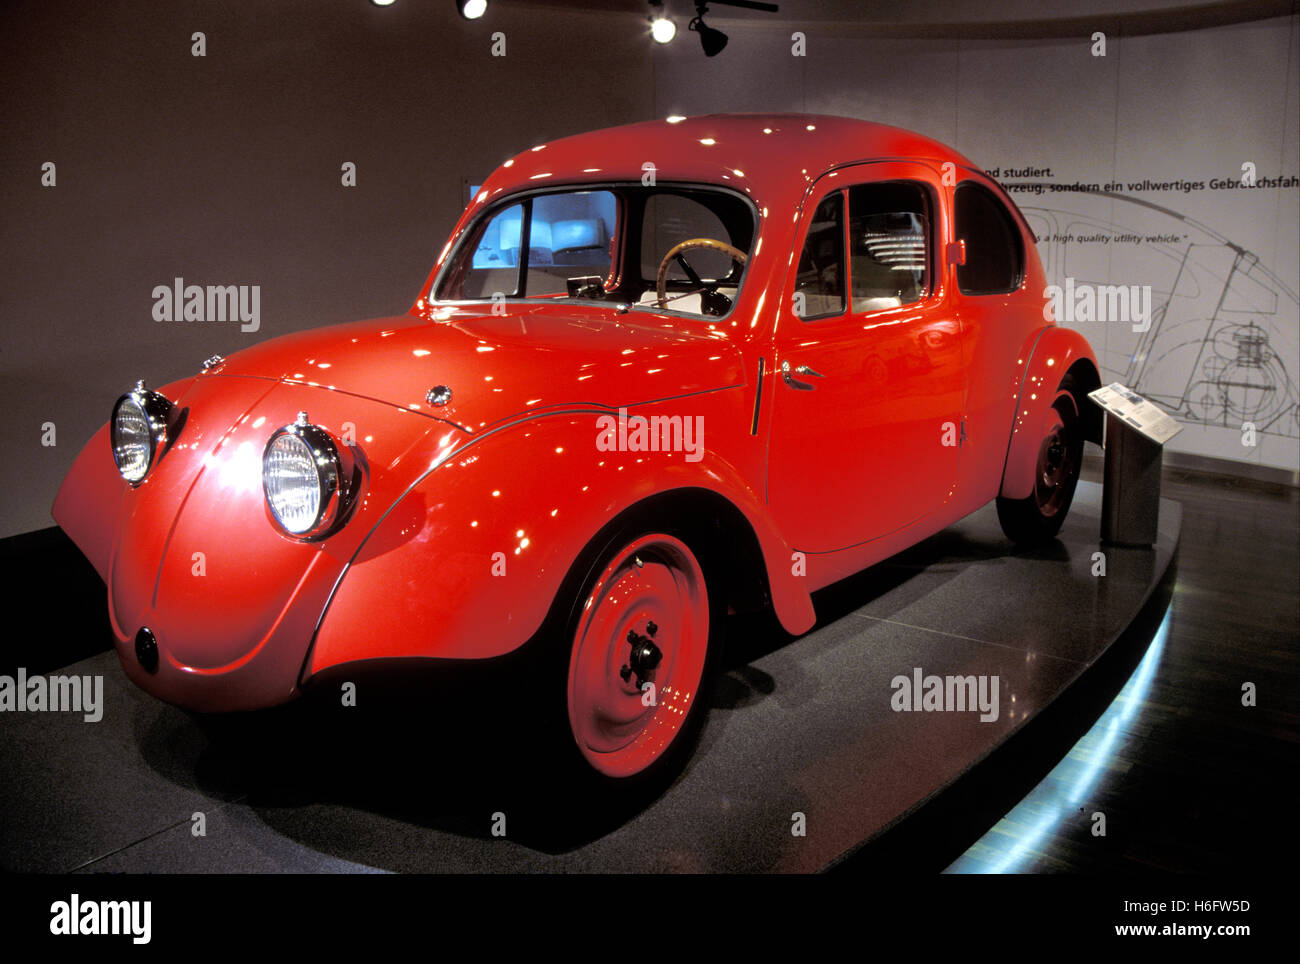 Germany, Wolfsburg, the Volkswagen Autostadt, VW Beetle prototype from 1935 at the Zeithaus. Stock Photo